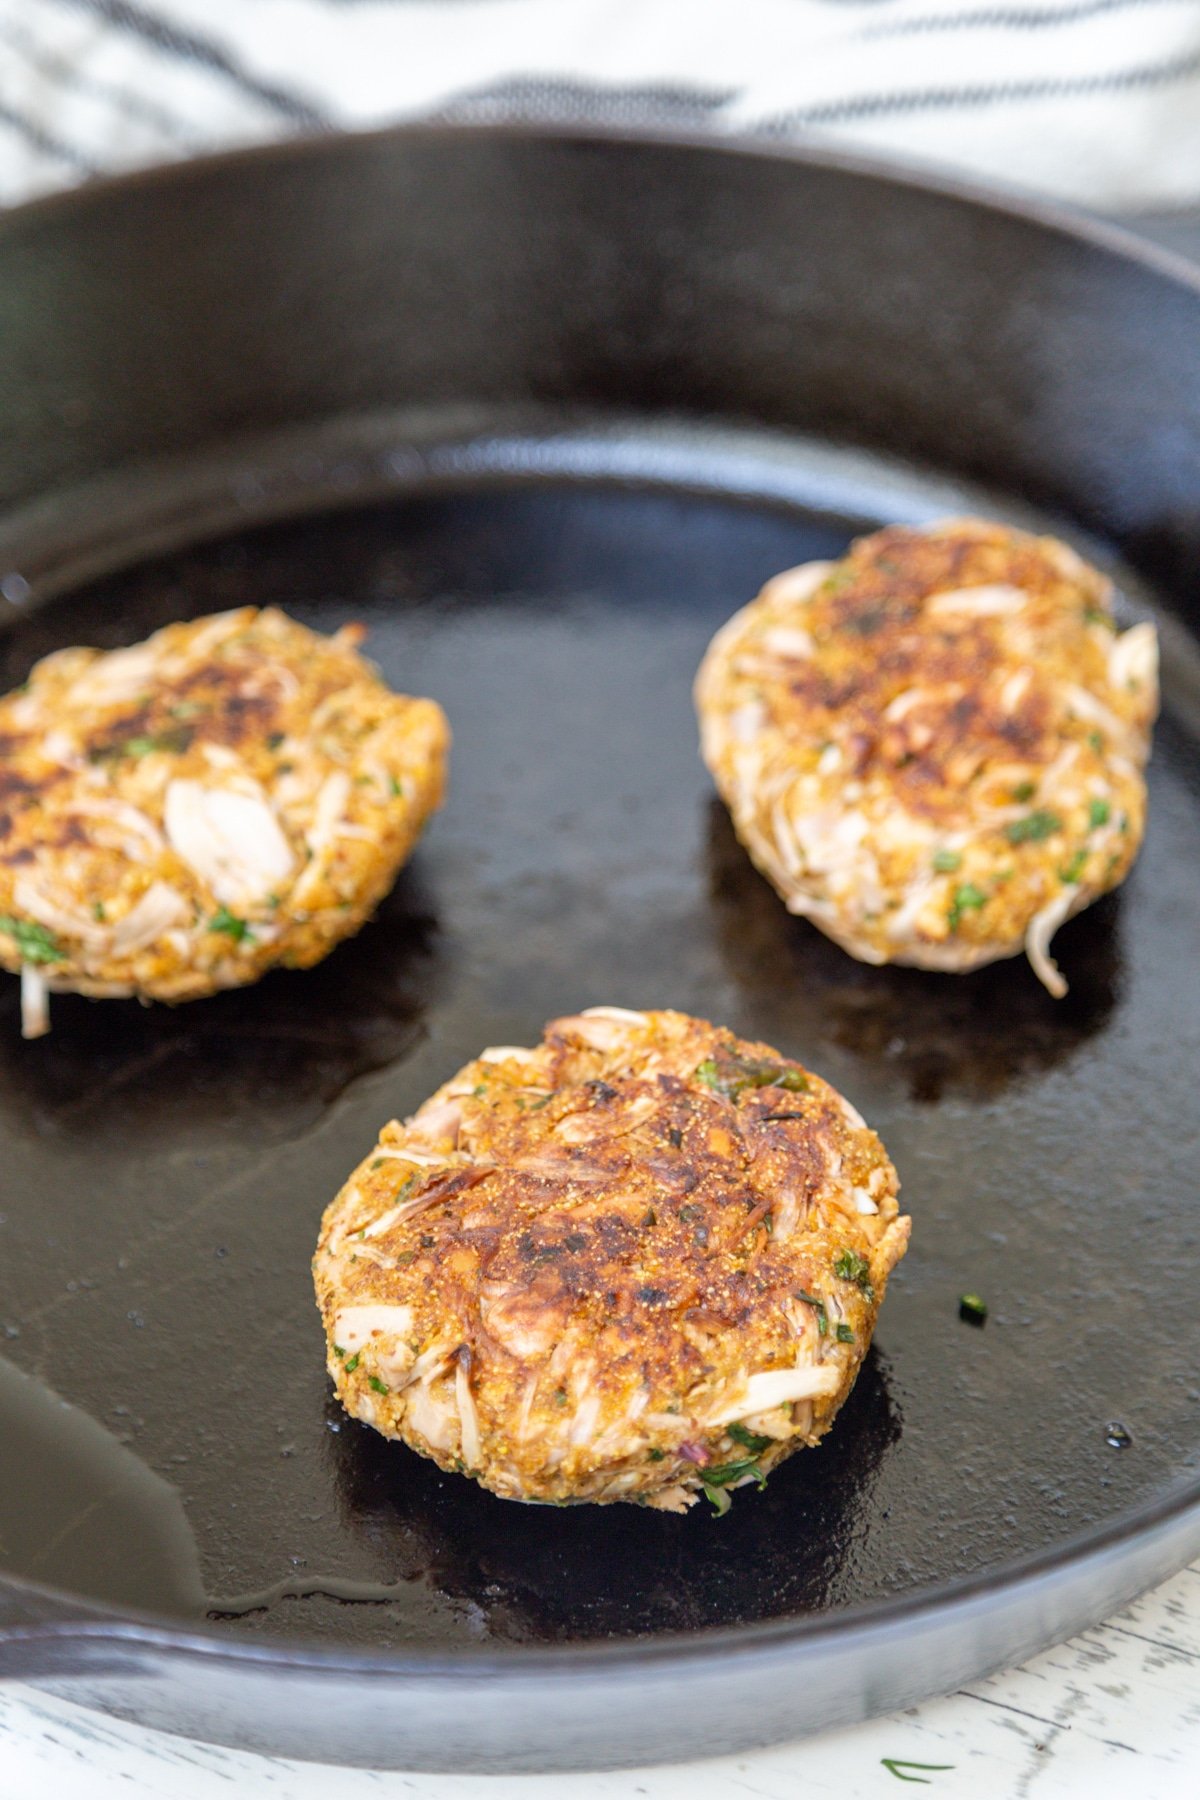 3 fried crab cakes in a cast iron pan.